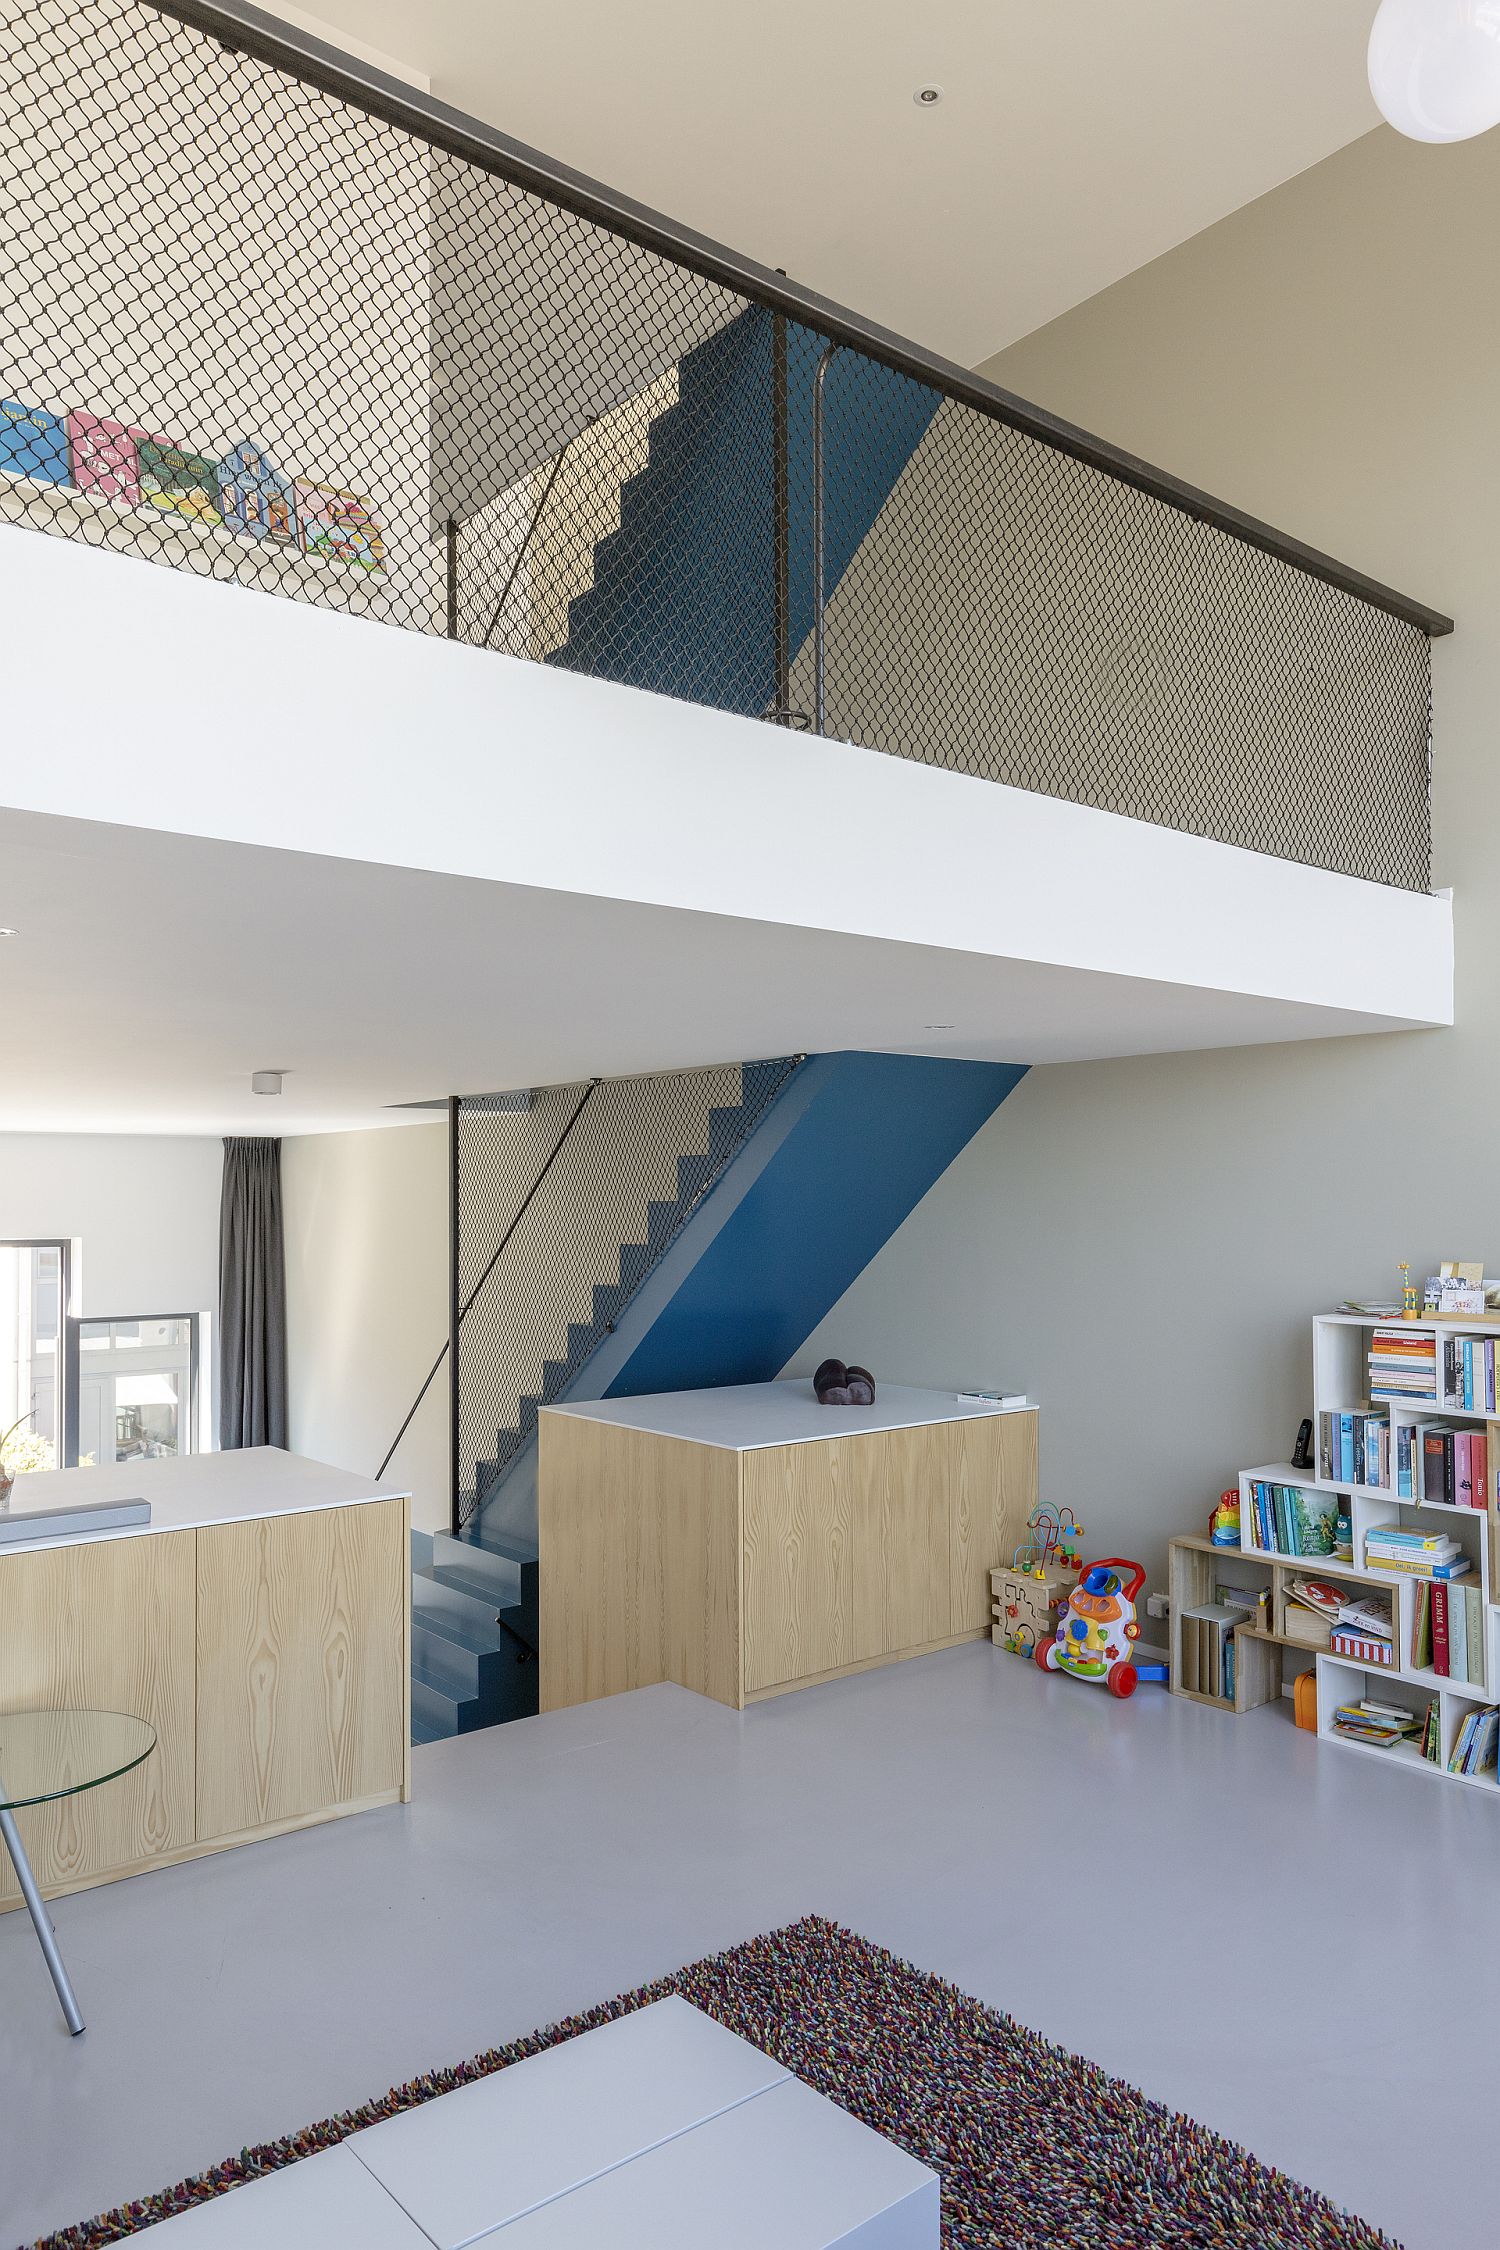 Multi-level interior of the blue house feels impersonal at best